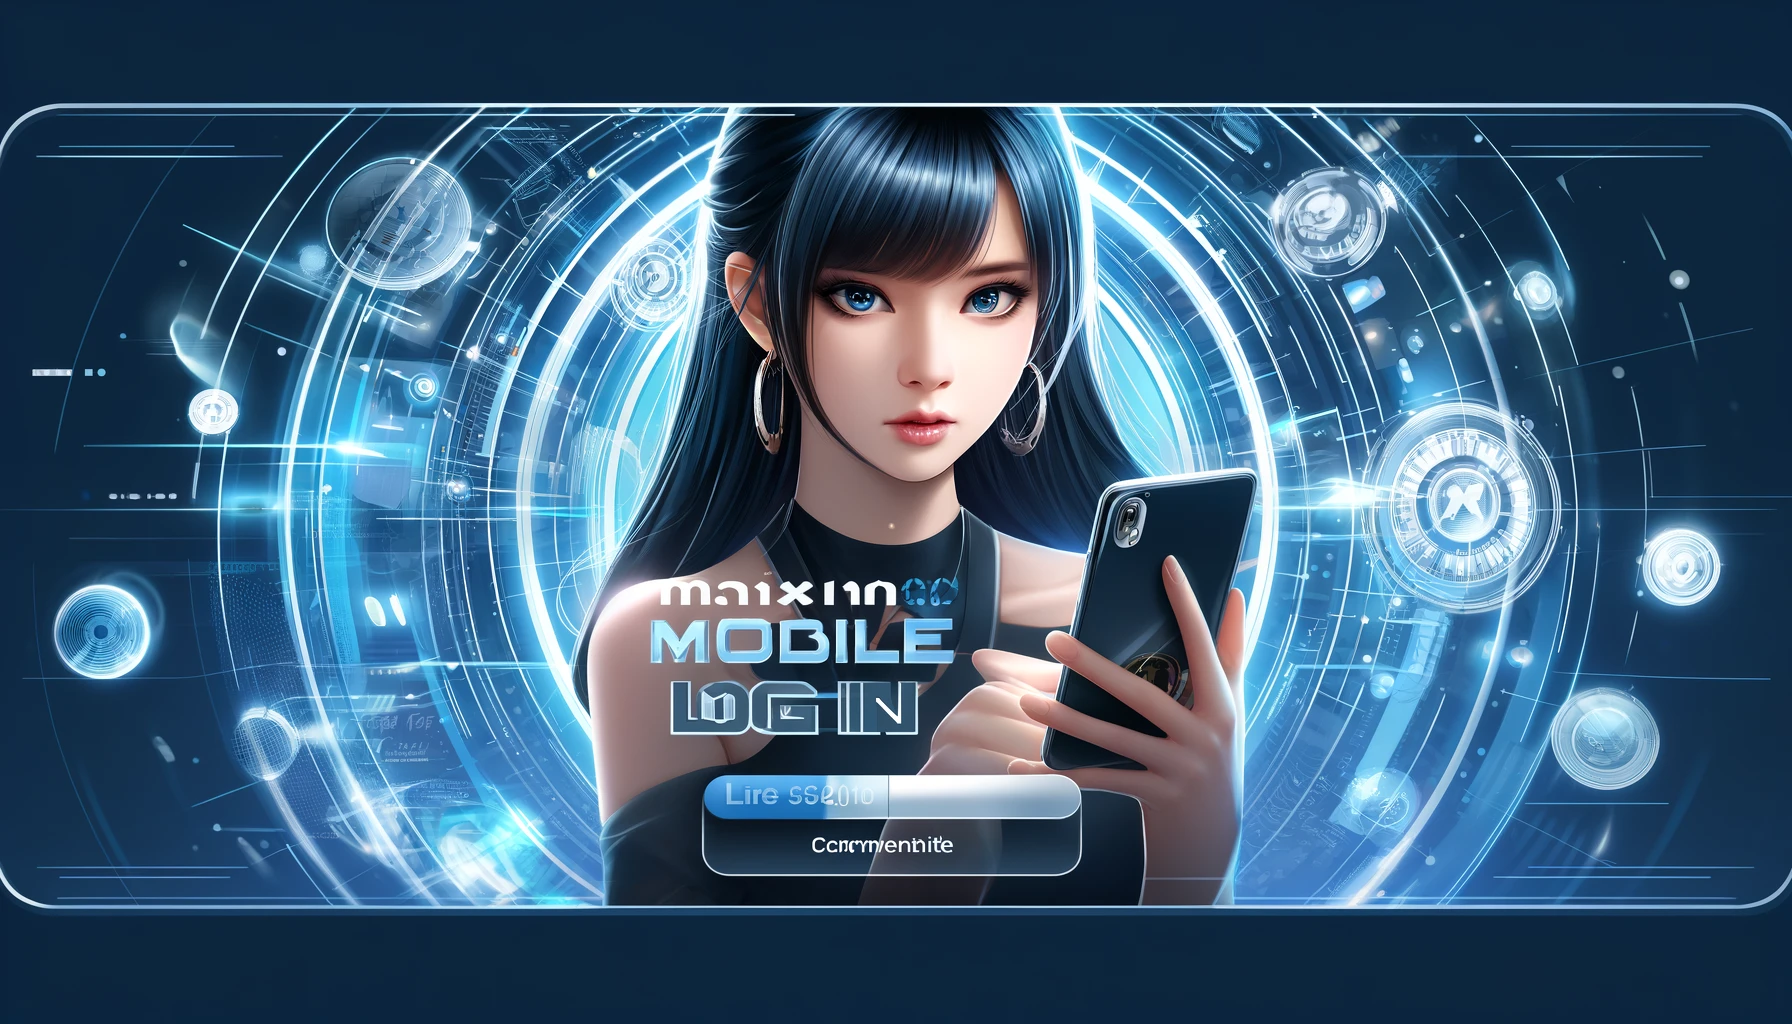 Maxim88 Mobile Login: Seamless Access for On-the-Go Gaming